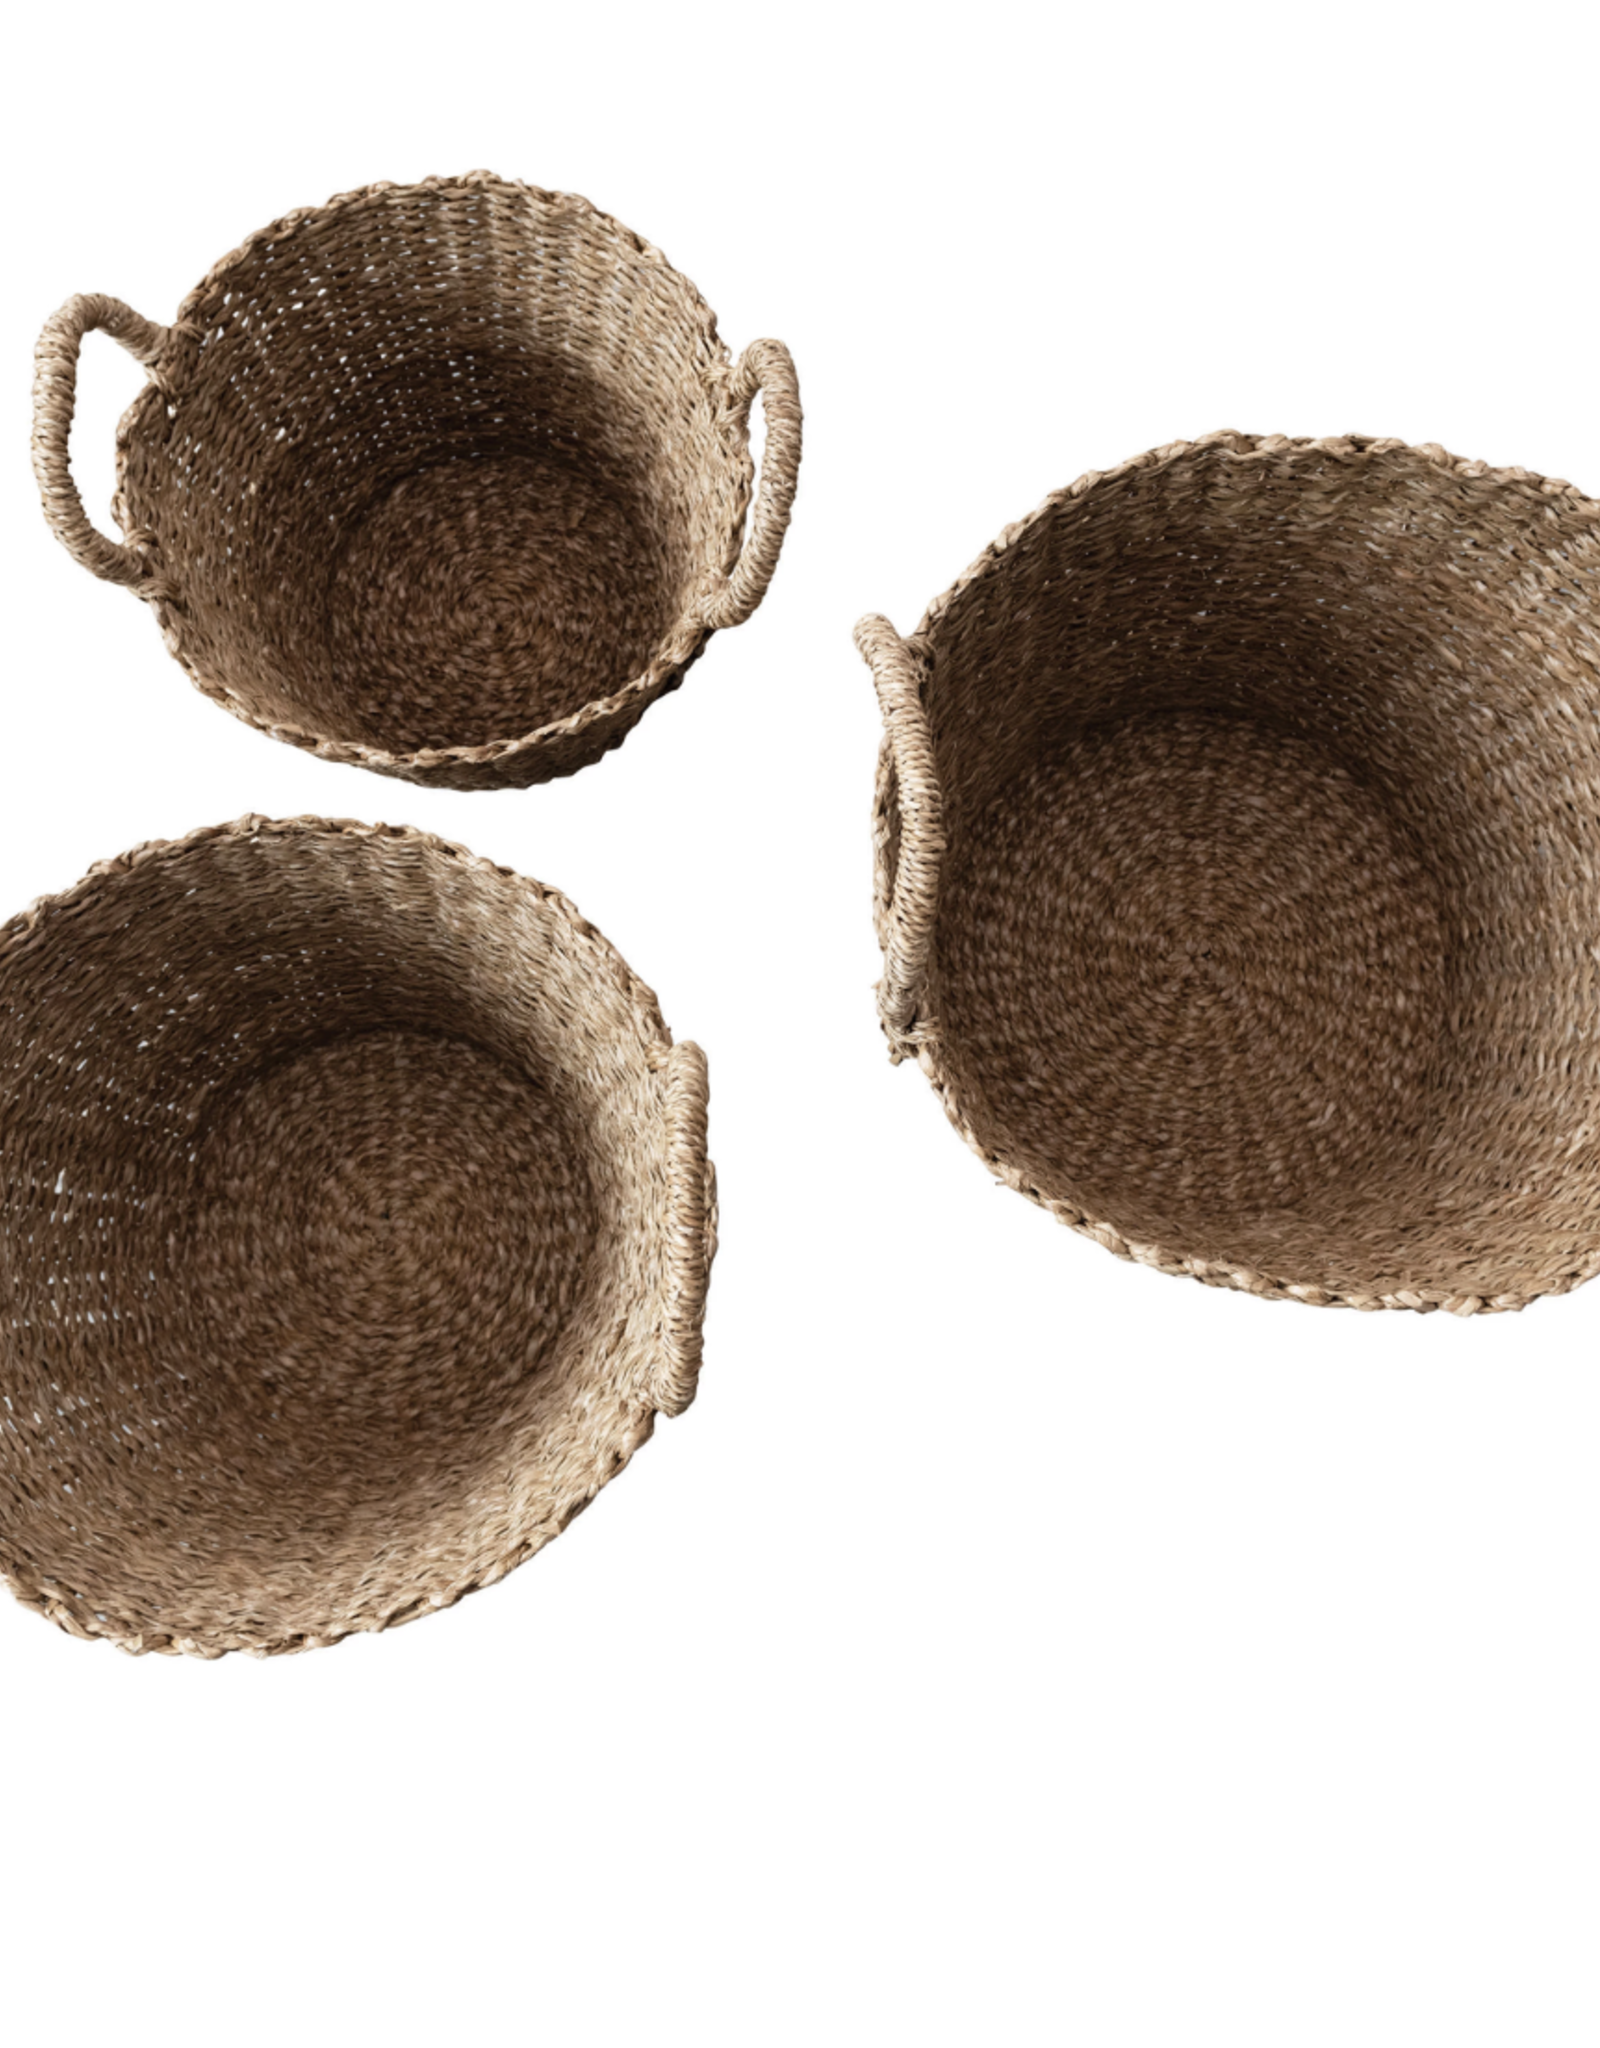 Hand-Woven Bankuan Basket with Braided Handles